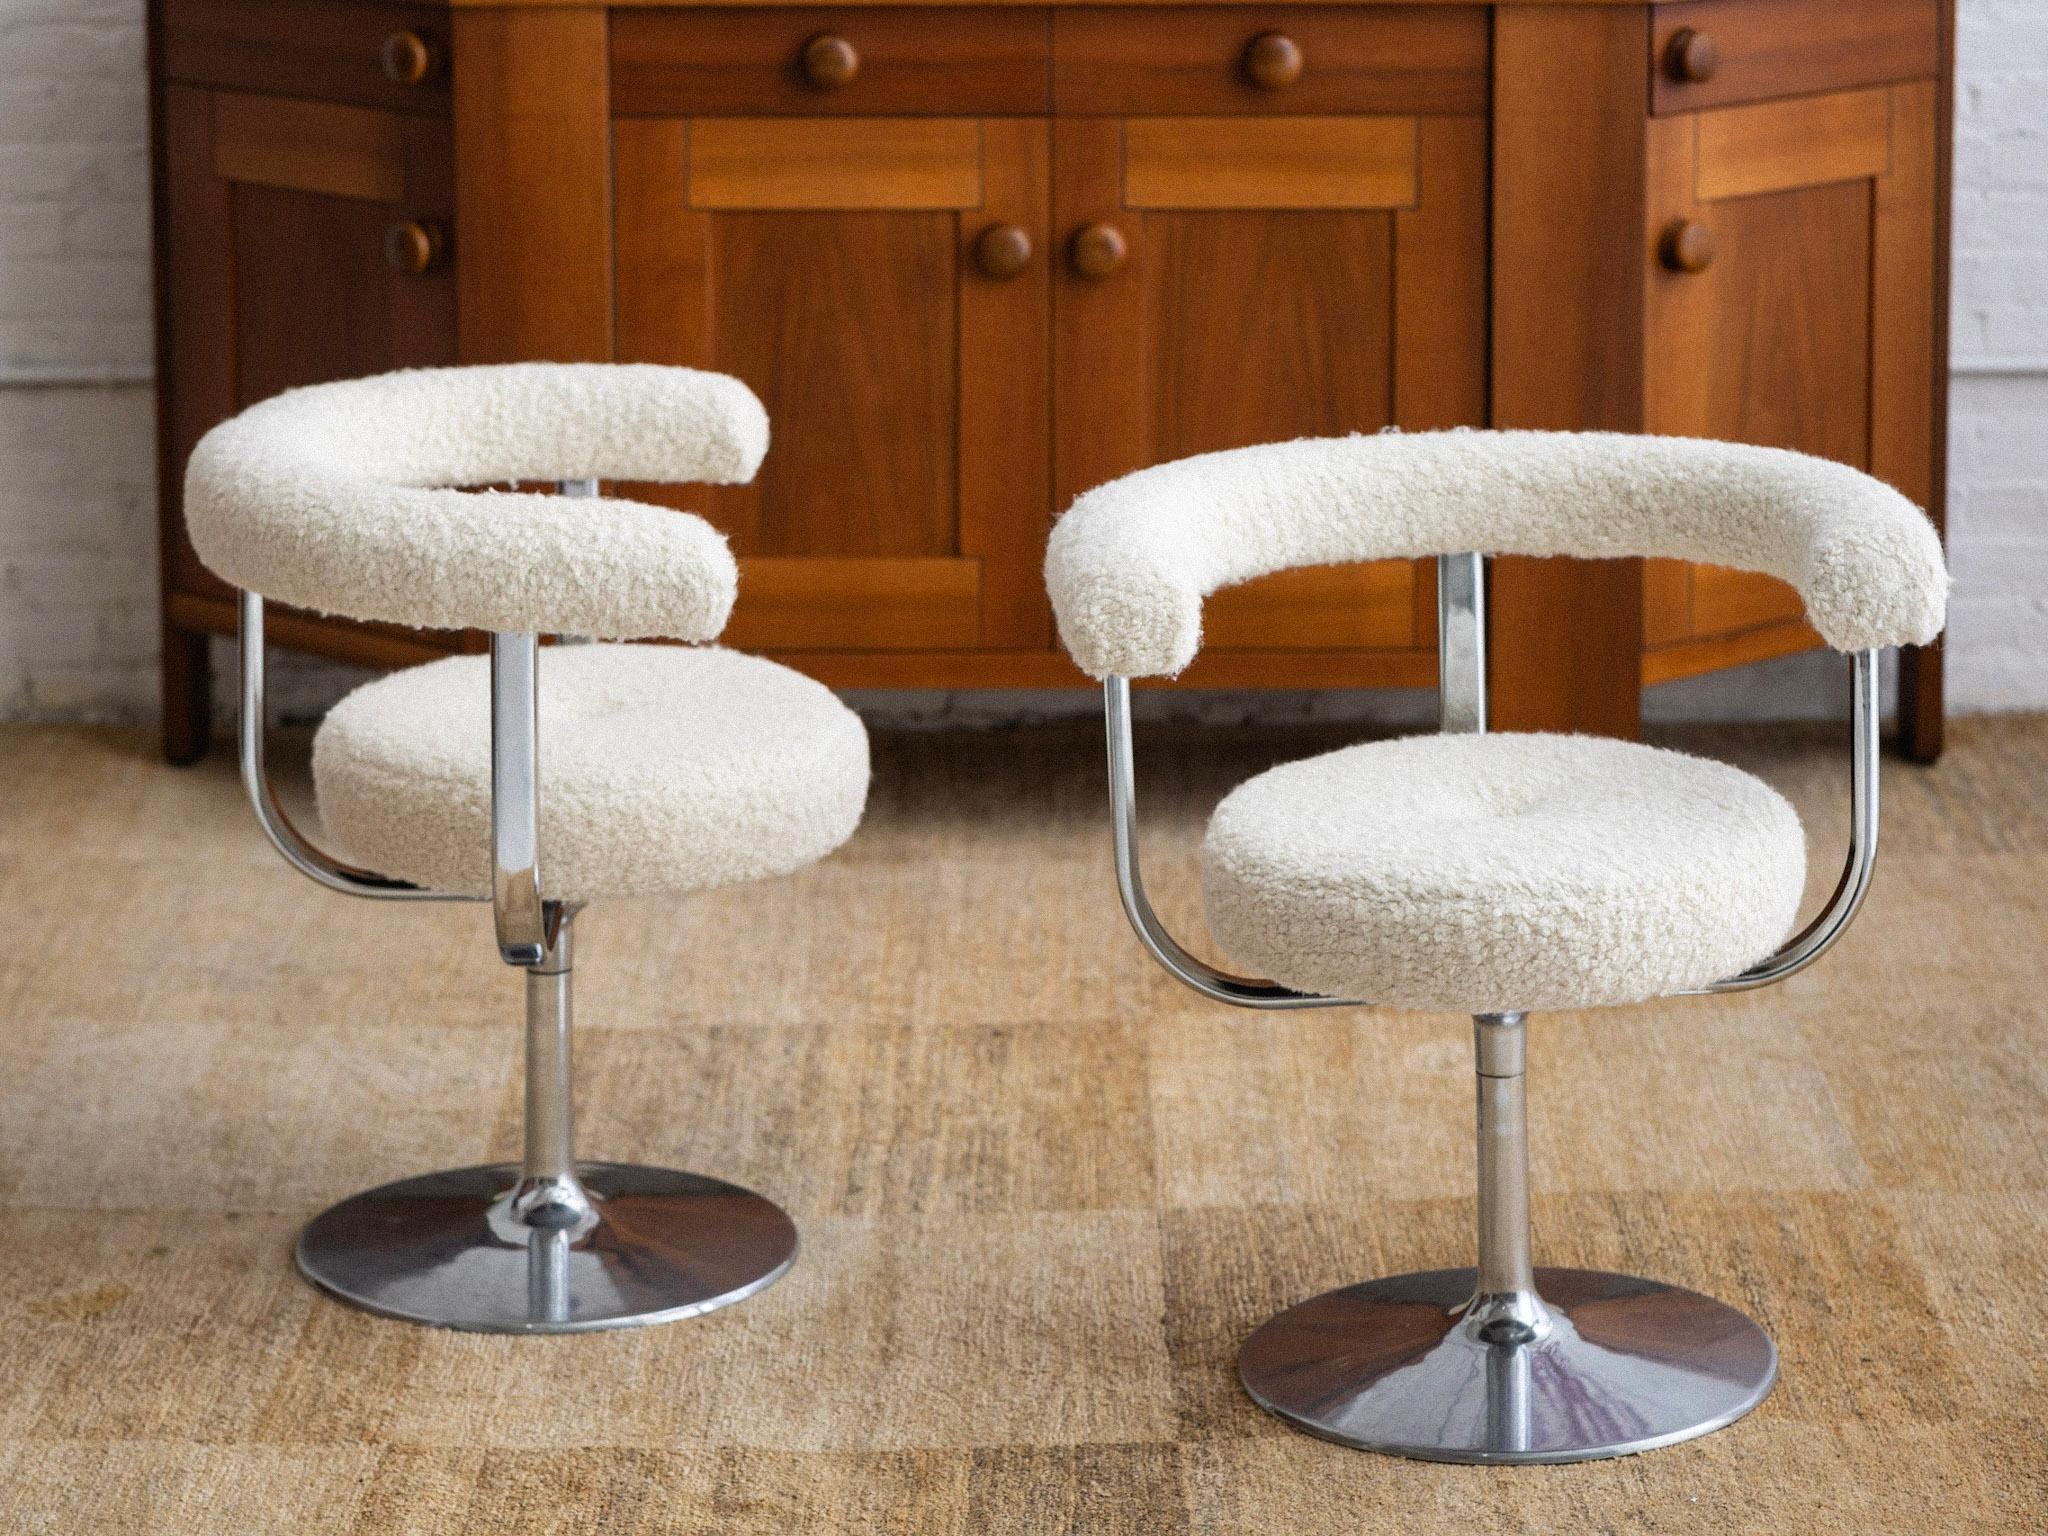 Space Age 1960s Chrome ‘Polar’ Chairs by Esko Pajamies for Lepo, Finland, a Pair For Sale